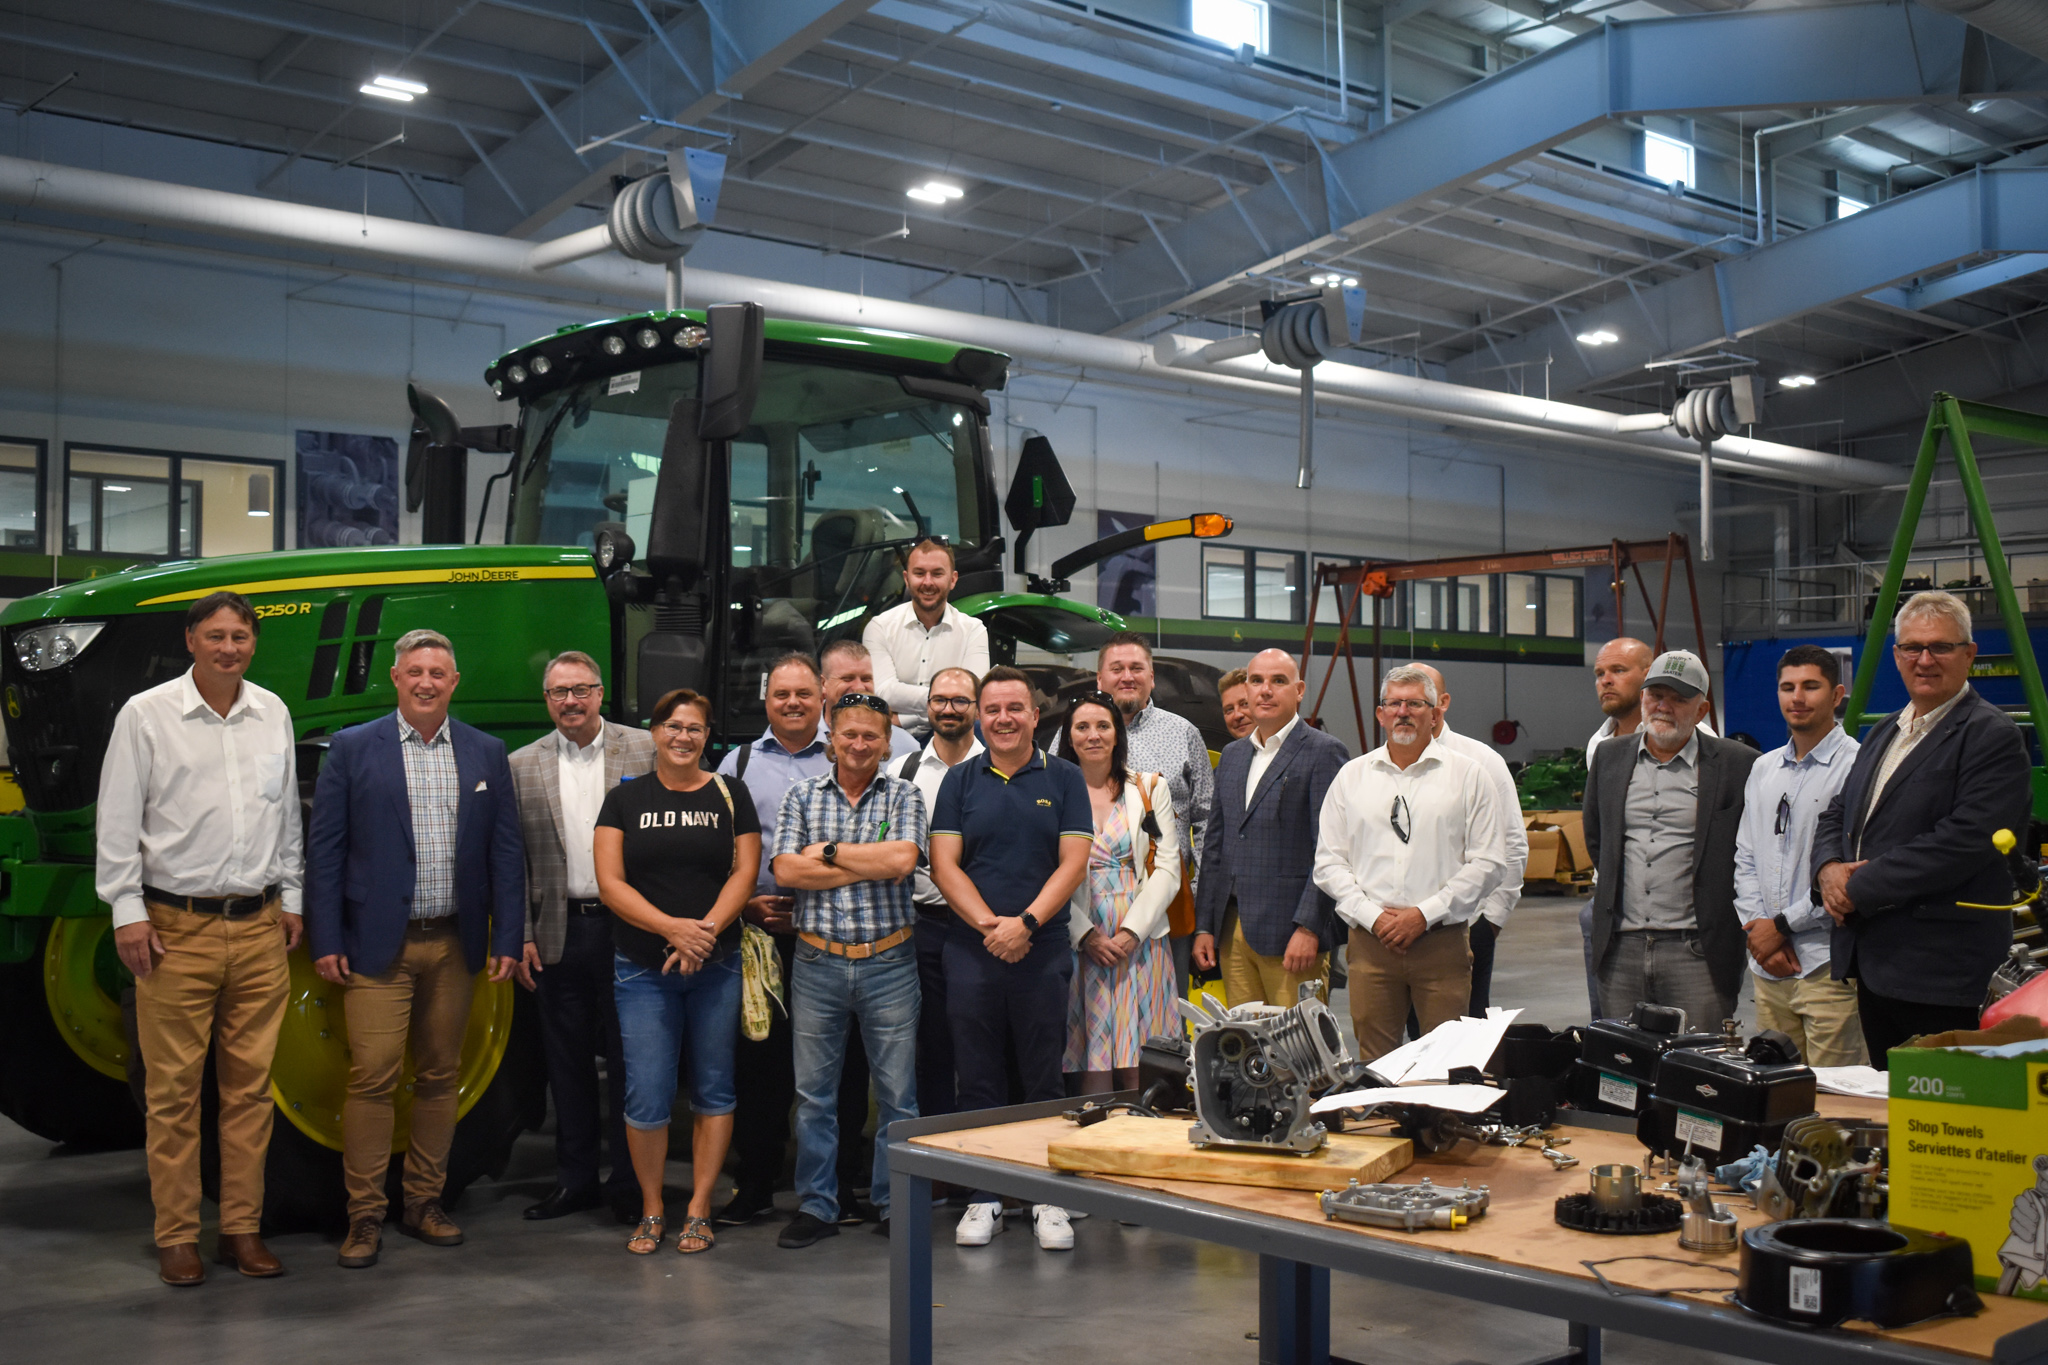 Delegation of Hungarian agriculture officials and experts in front of a John Deere tractor at the VU Agricultural Center